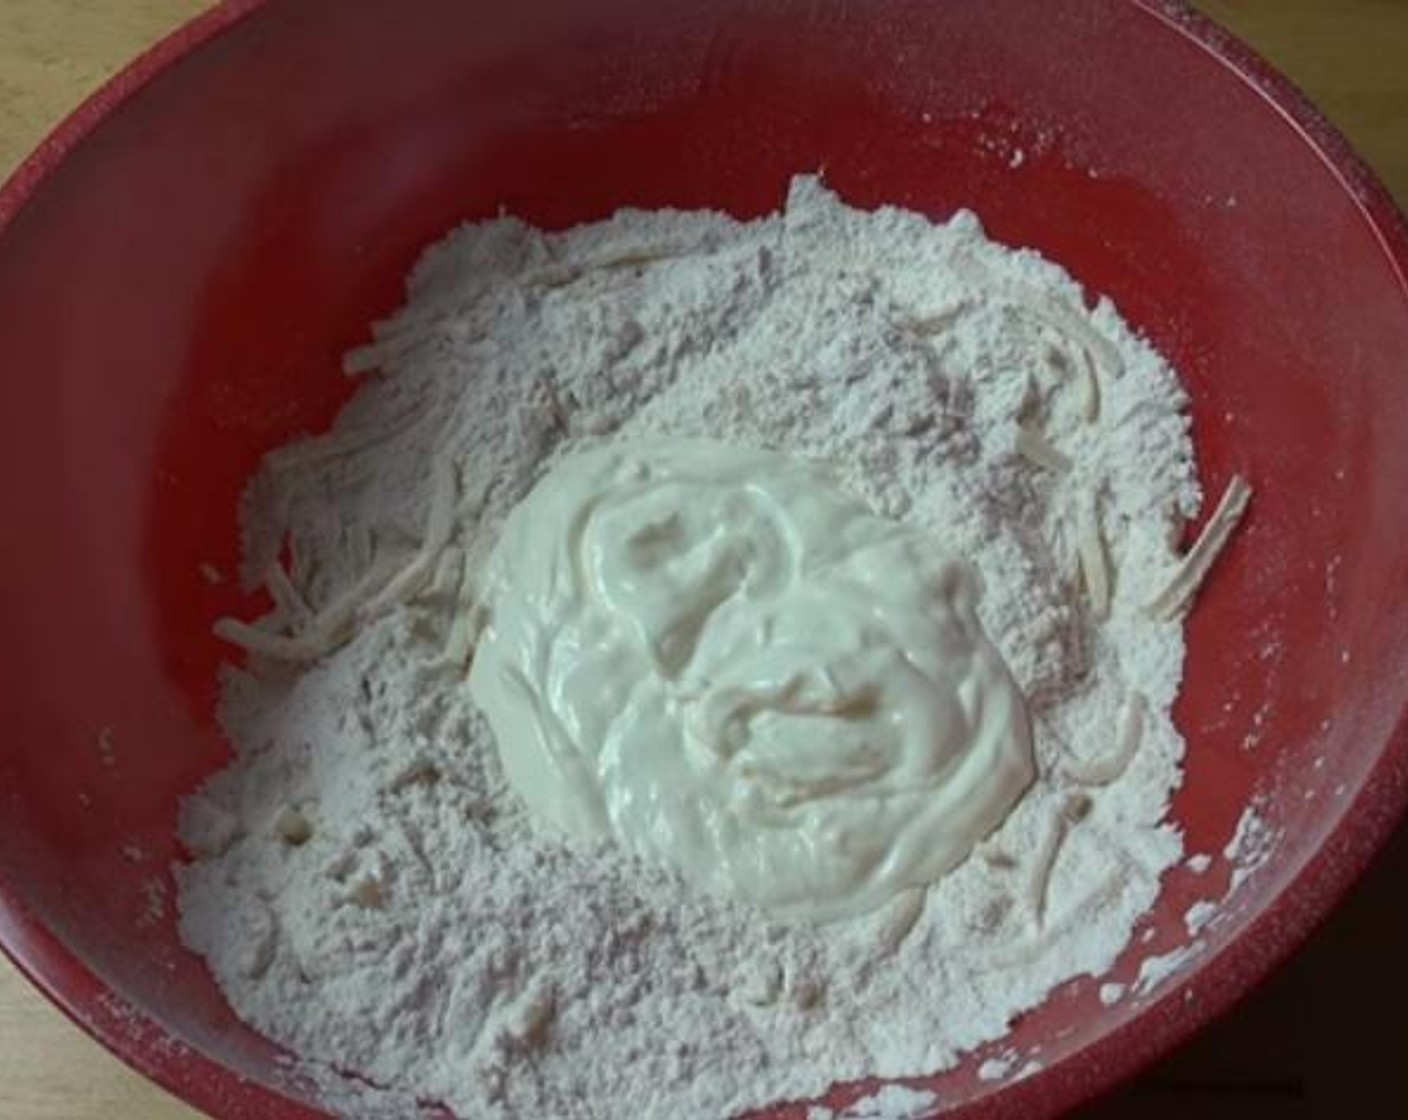 step 1 Inside a mixing bowl, mix together your Self-Rising Flour (2 cups), Cheese (1/2 cup), and Salt (1 pinch). Add the Natural Unflavored Yogurt (1/4 cup) and mix until a nice and smooth dough forms.